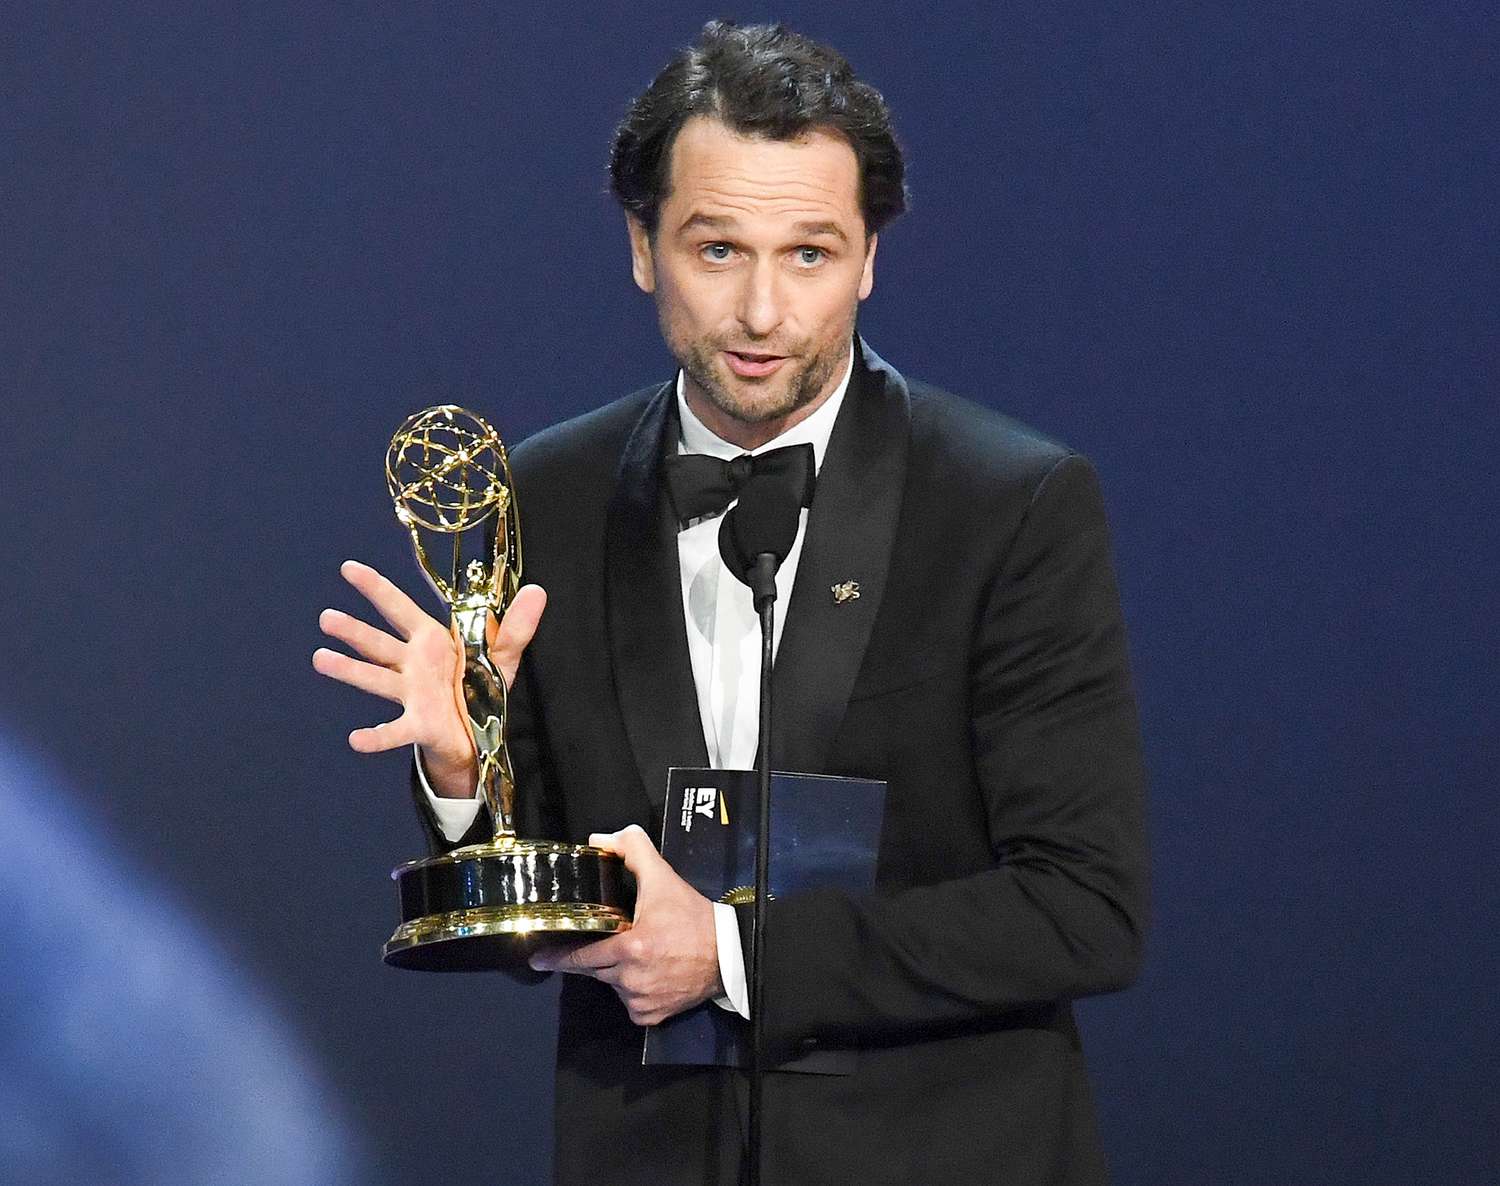 High: The Americans gets some Emmy love at last